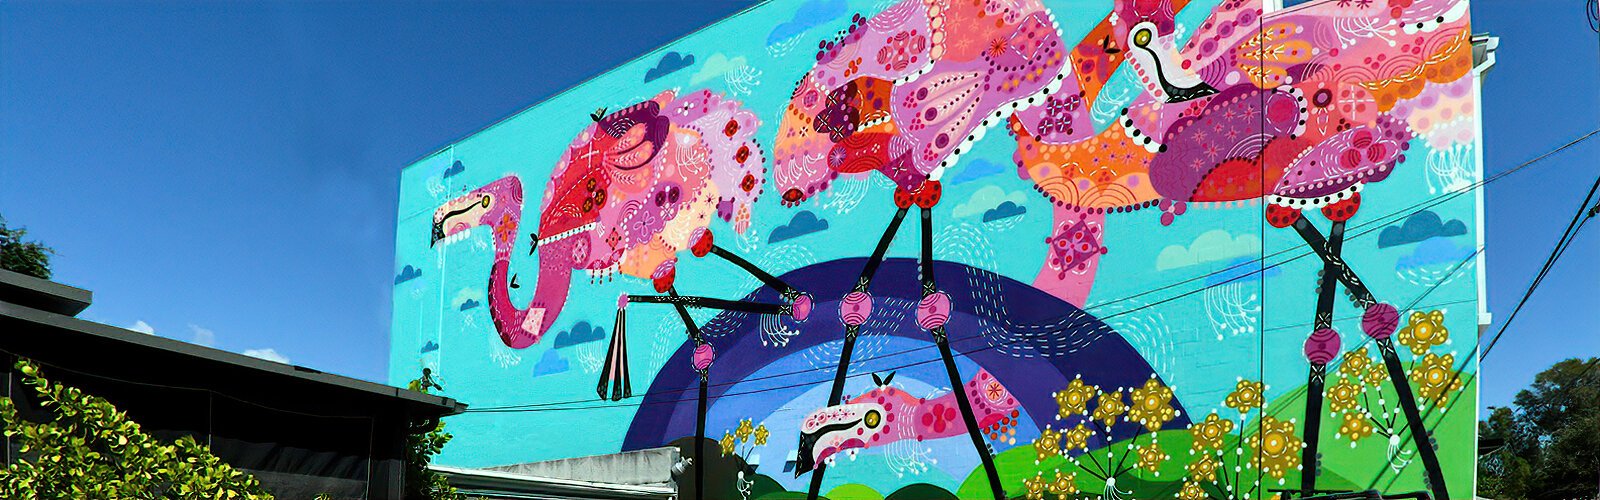 The flamingo pink wave is beautifully depicted in the heart of St Petersburg by California artist Bunnie Reiss for the 2023 SHINE Mural Festival, which was presented by REFLECTION St Pete.